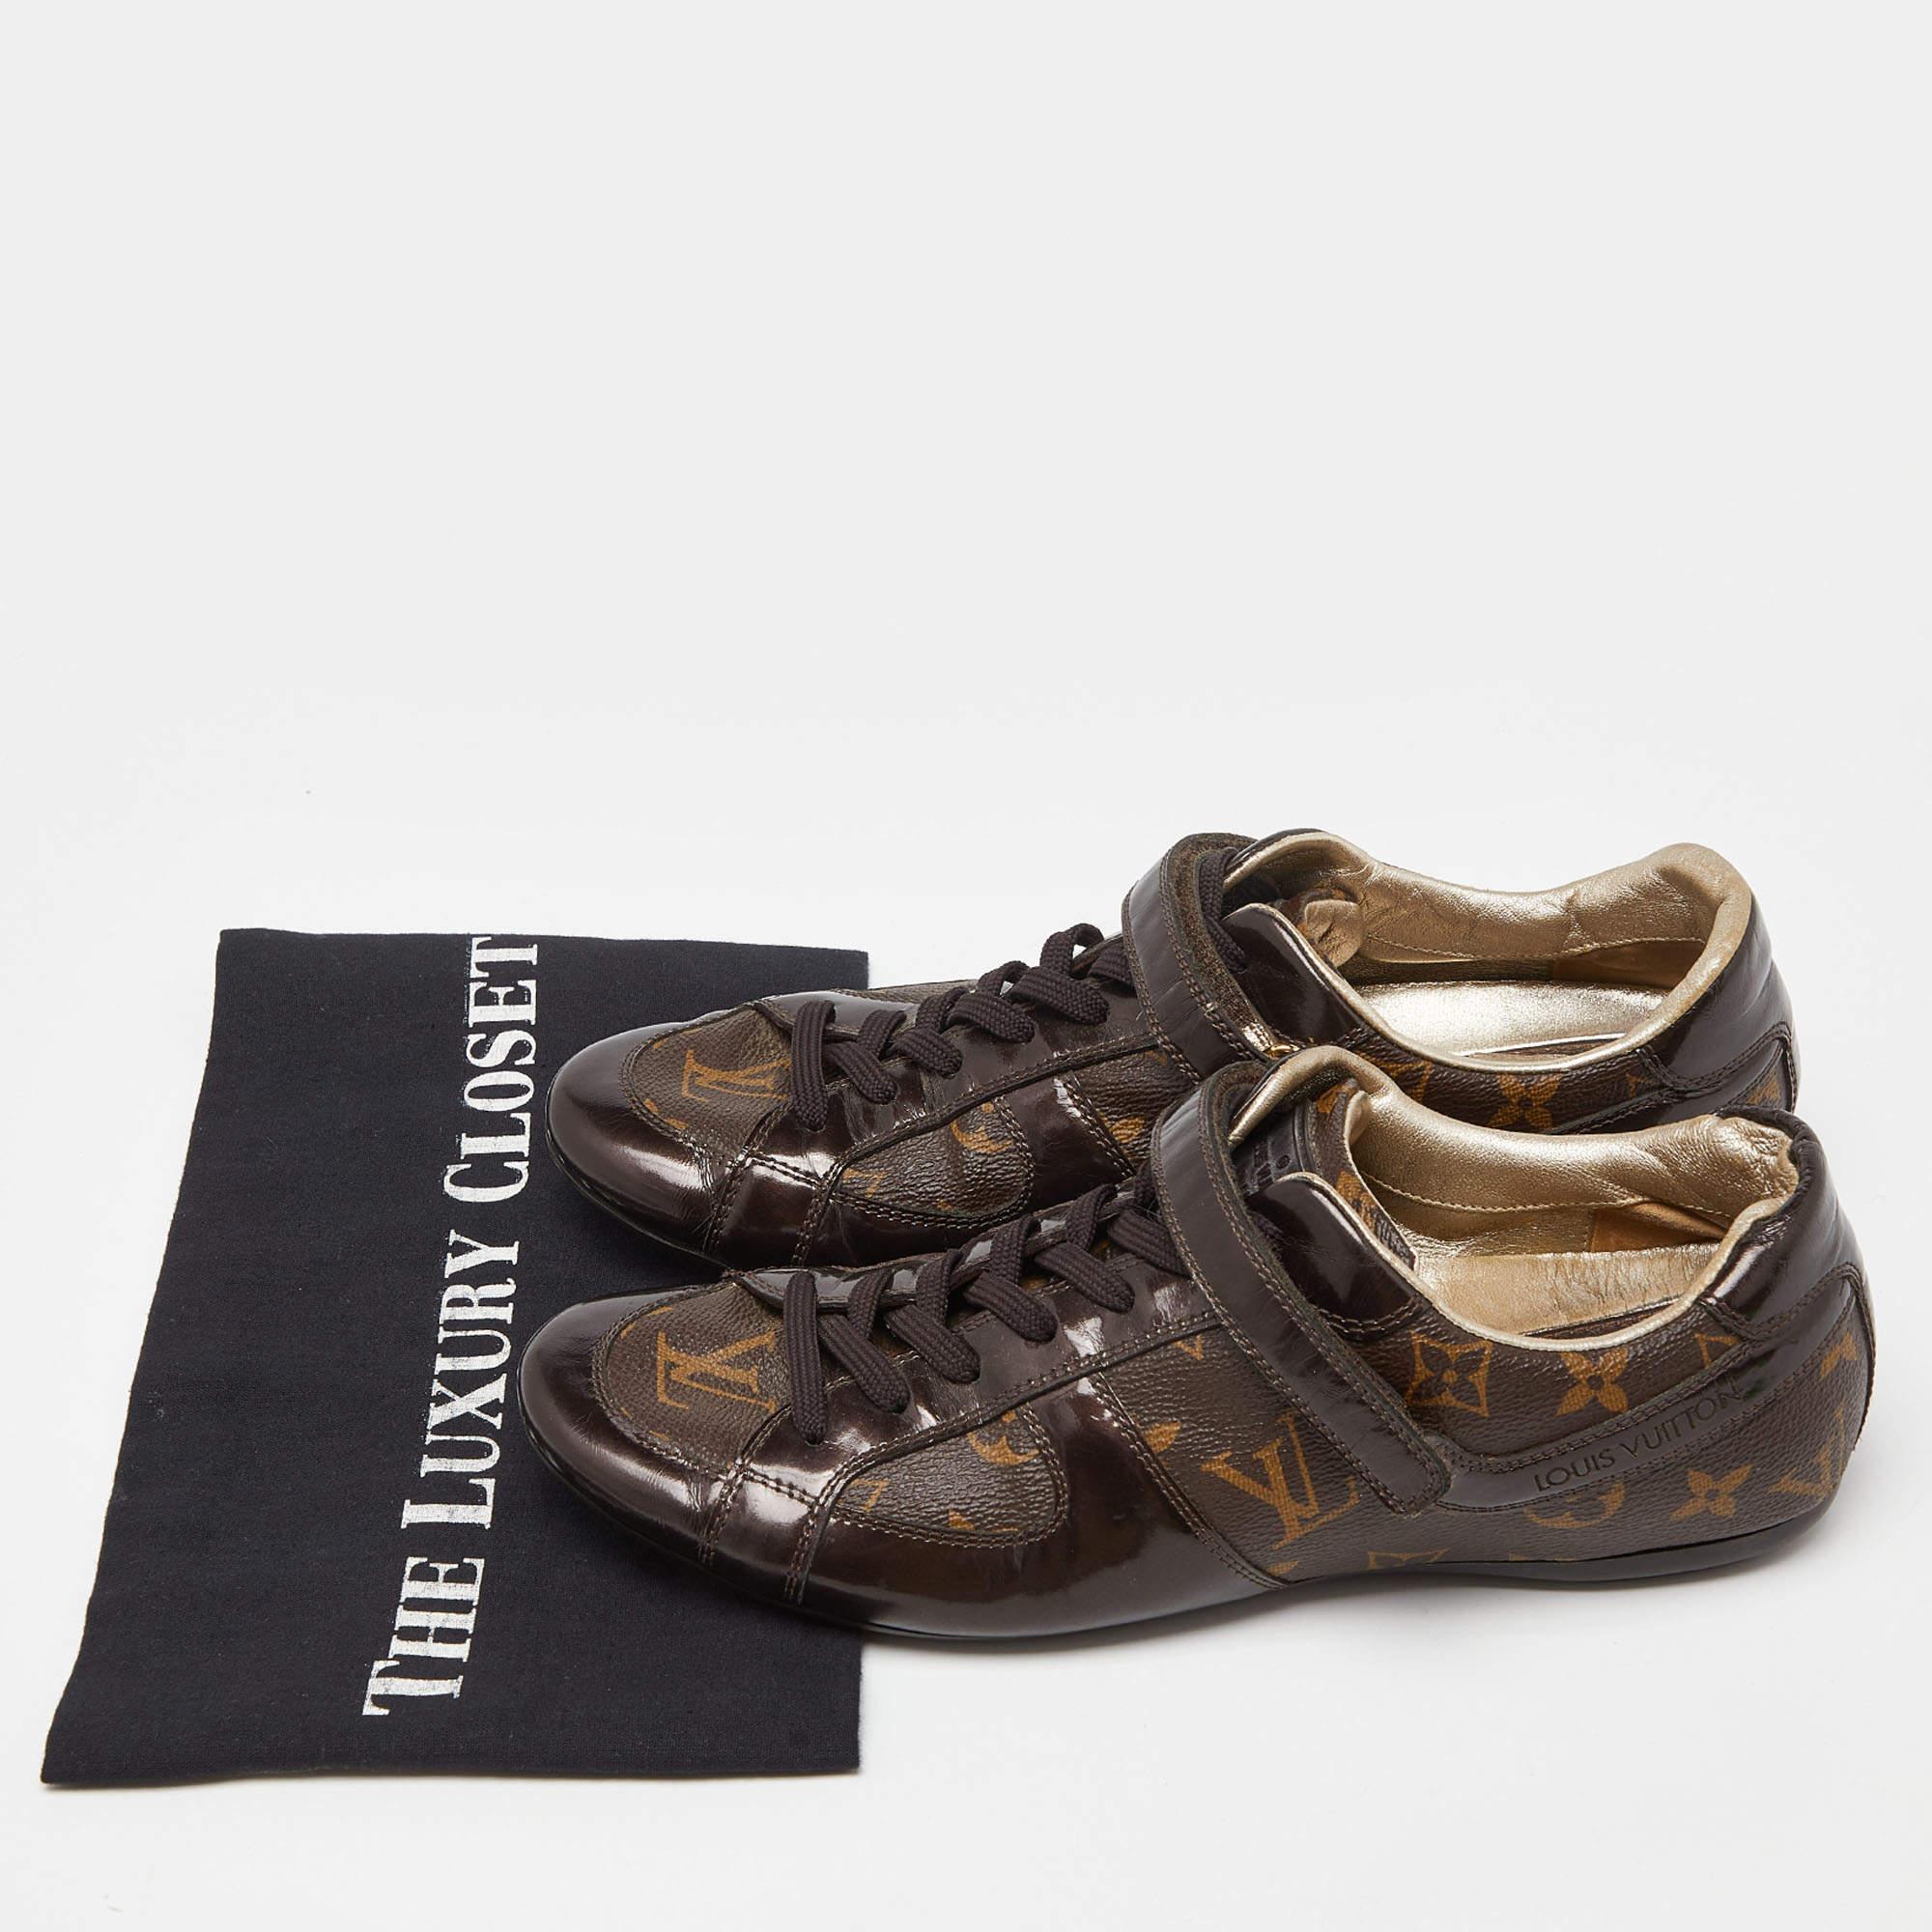 Louis Vuitton Brown Monogram Canvas and Patent Leather Gloe Trotter Sneakers Siz For Sale 5